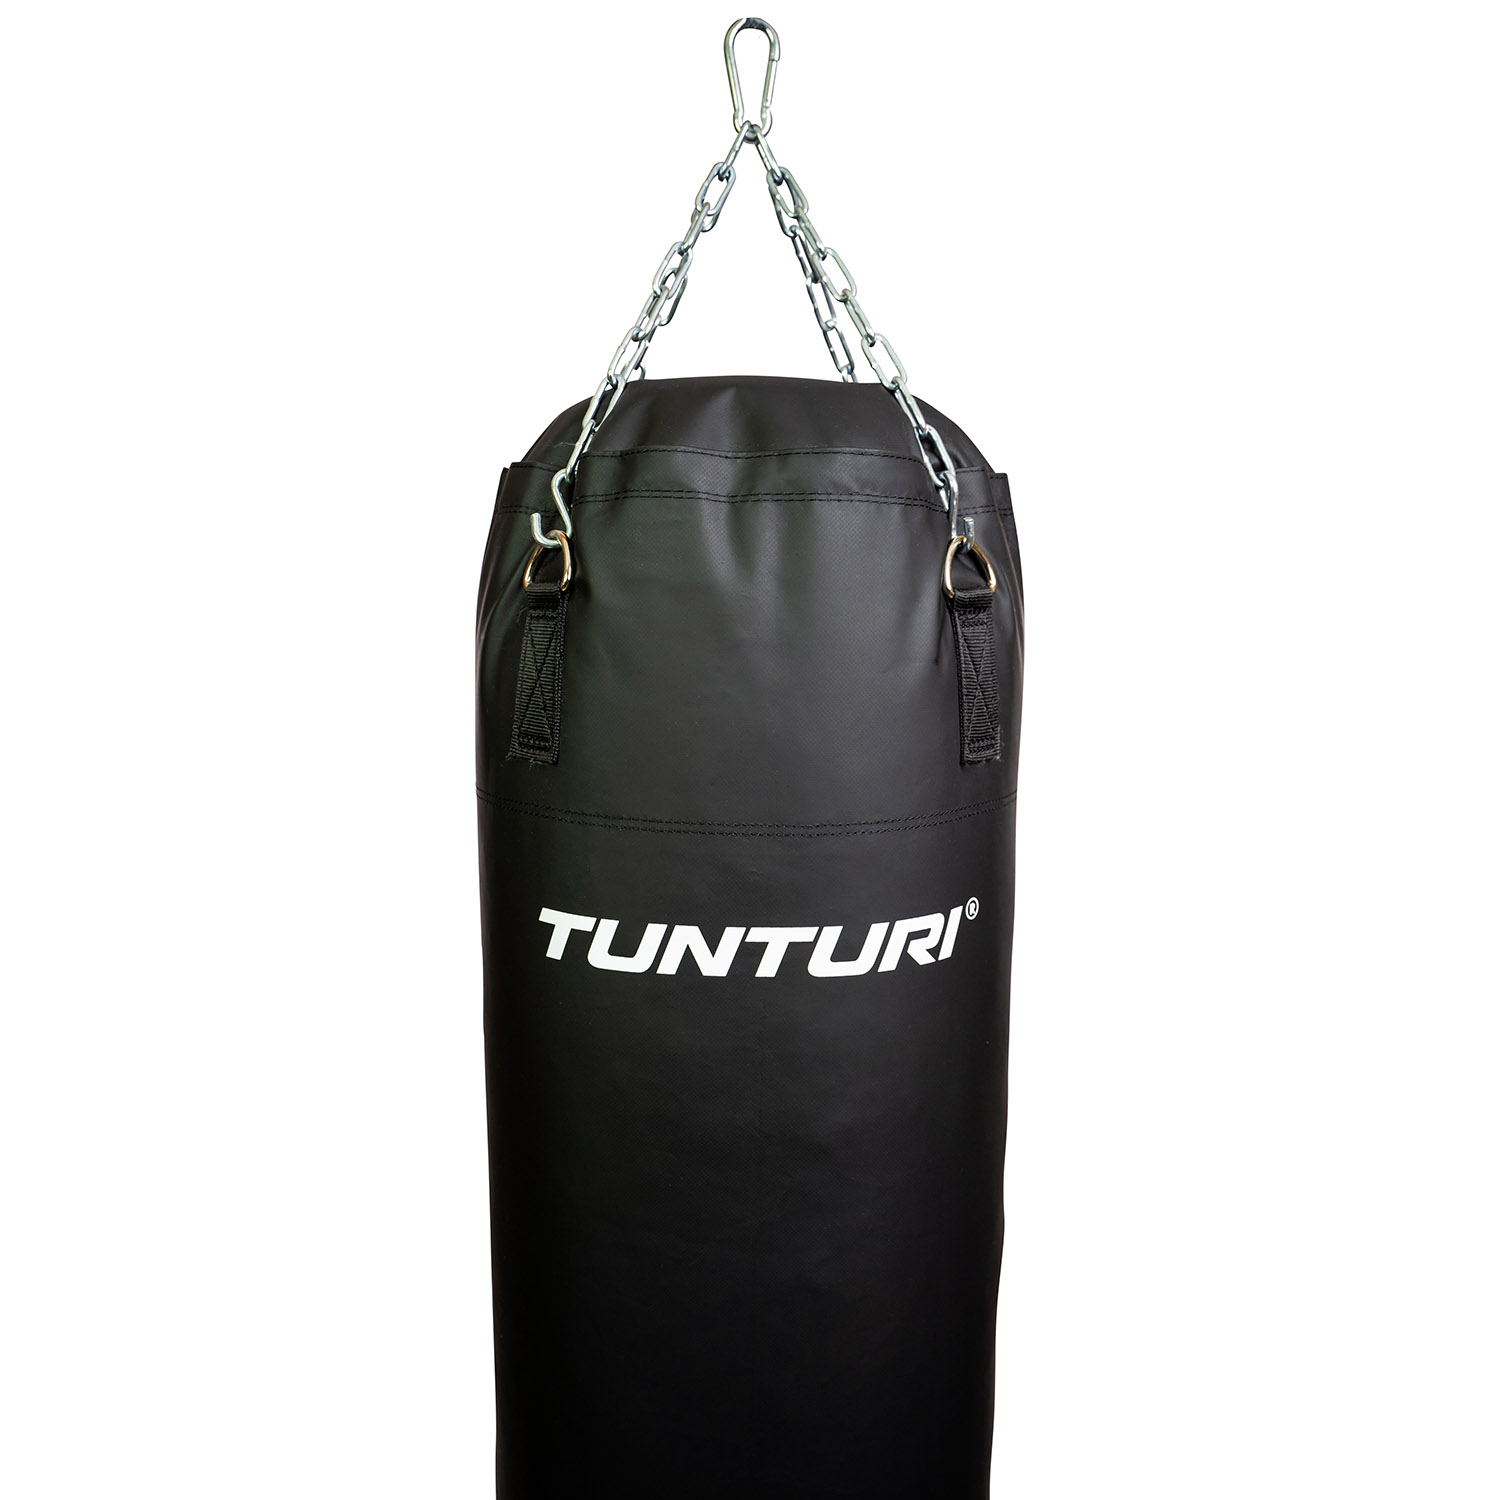 How to fill a punching bag correctly - Solo Artes Marciales